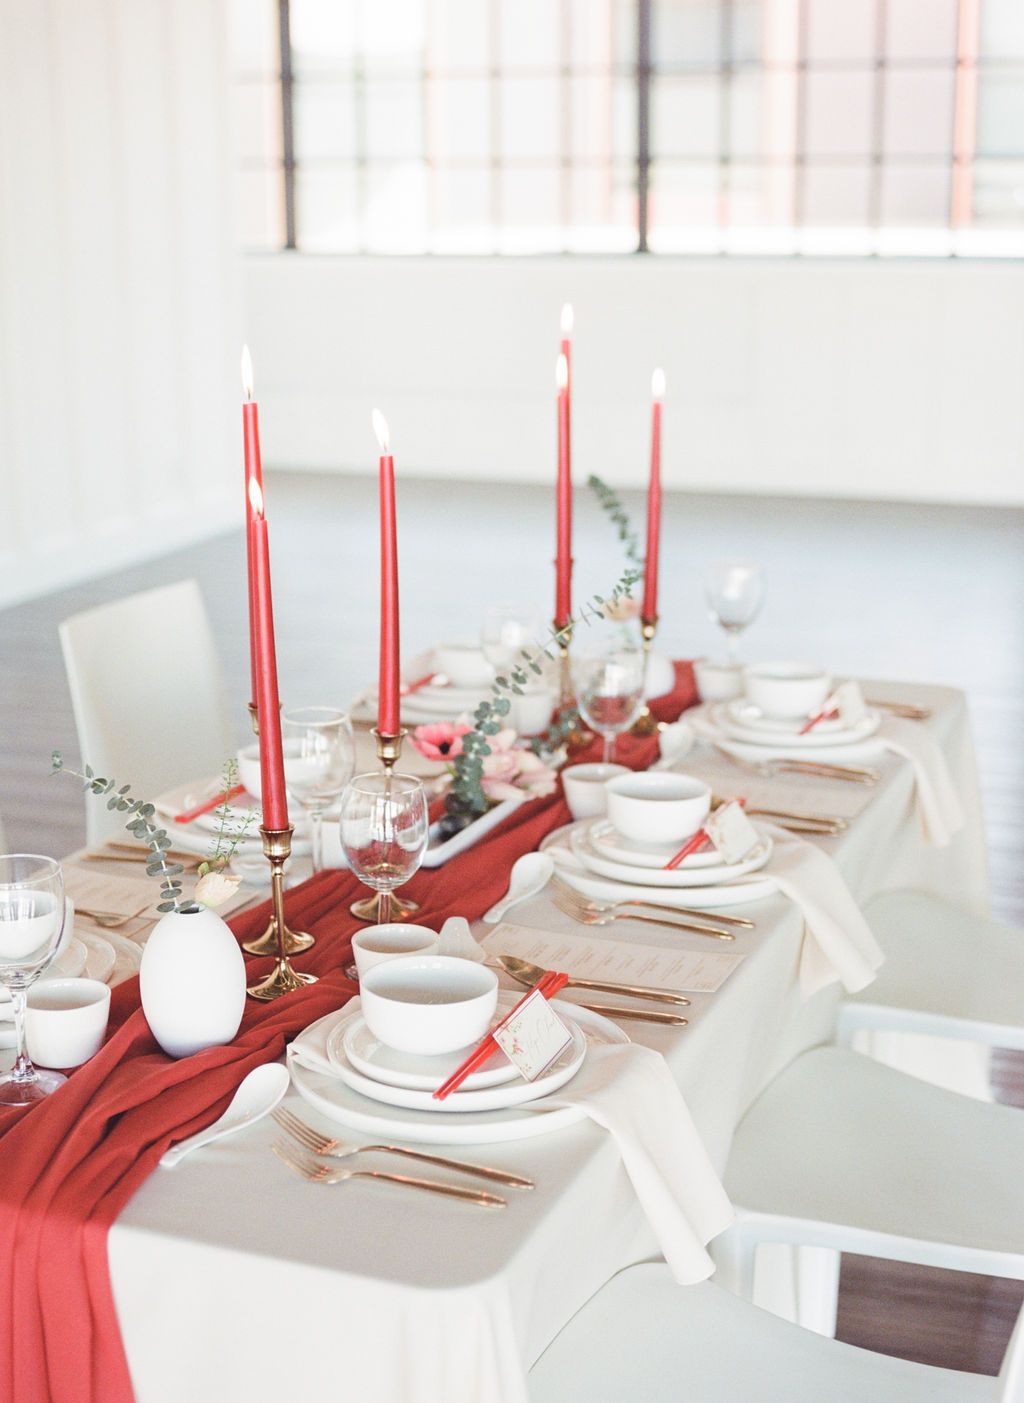 Modern Wedding Table Design in Vancouver BC, with Asian inspired place settings, taper candles in a bold red accent, and modern decor elements.